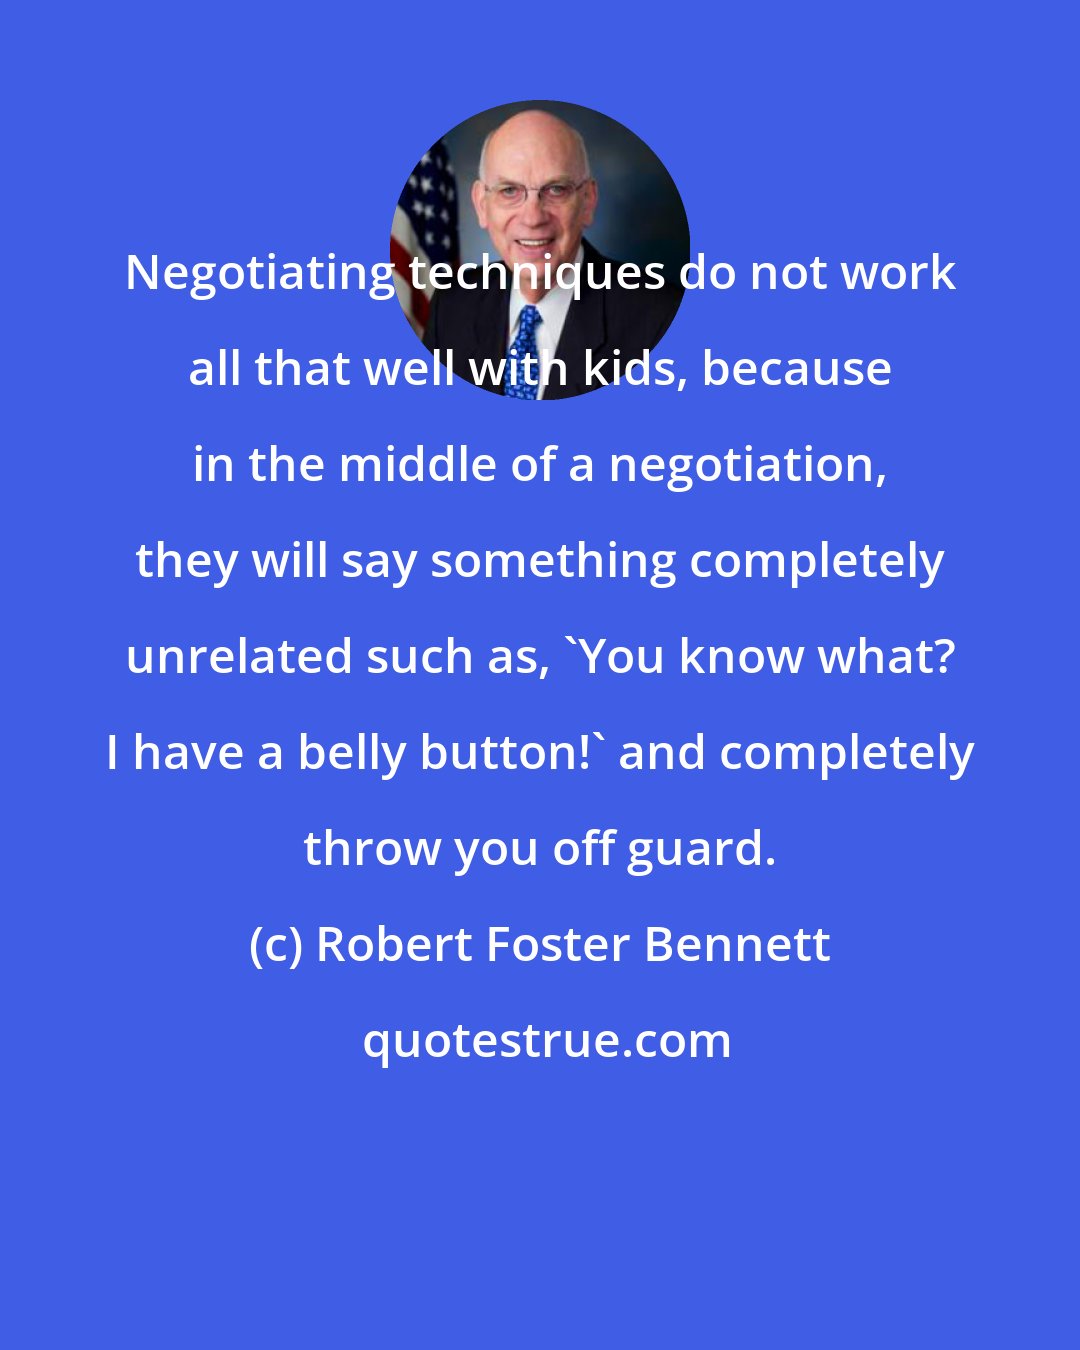 Robert Foster Bennett: Negotiating techniques do not work all that well with kids, because in the middle of a negotiation, they will say something completely unrelated such as, 'You know what? I have a belly button!' and completely throw you off guard.